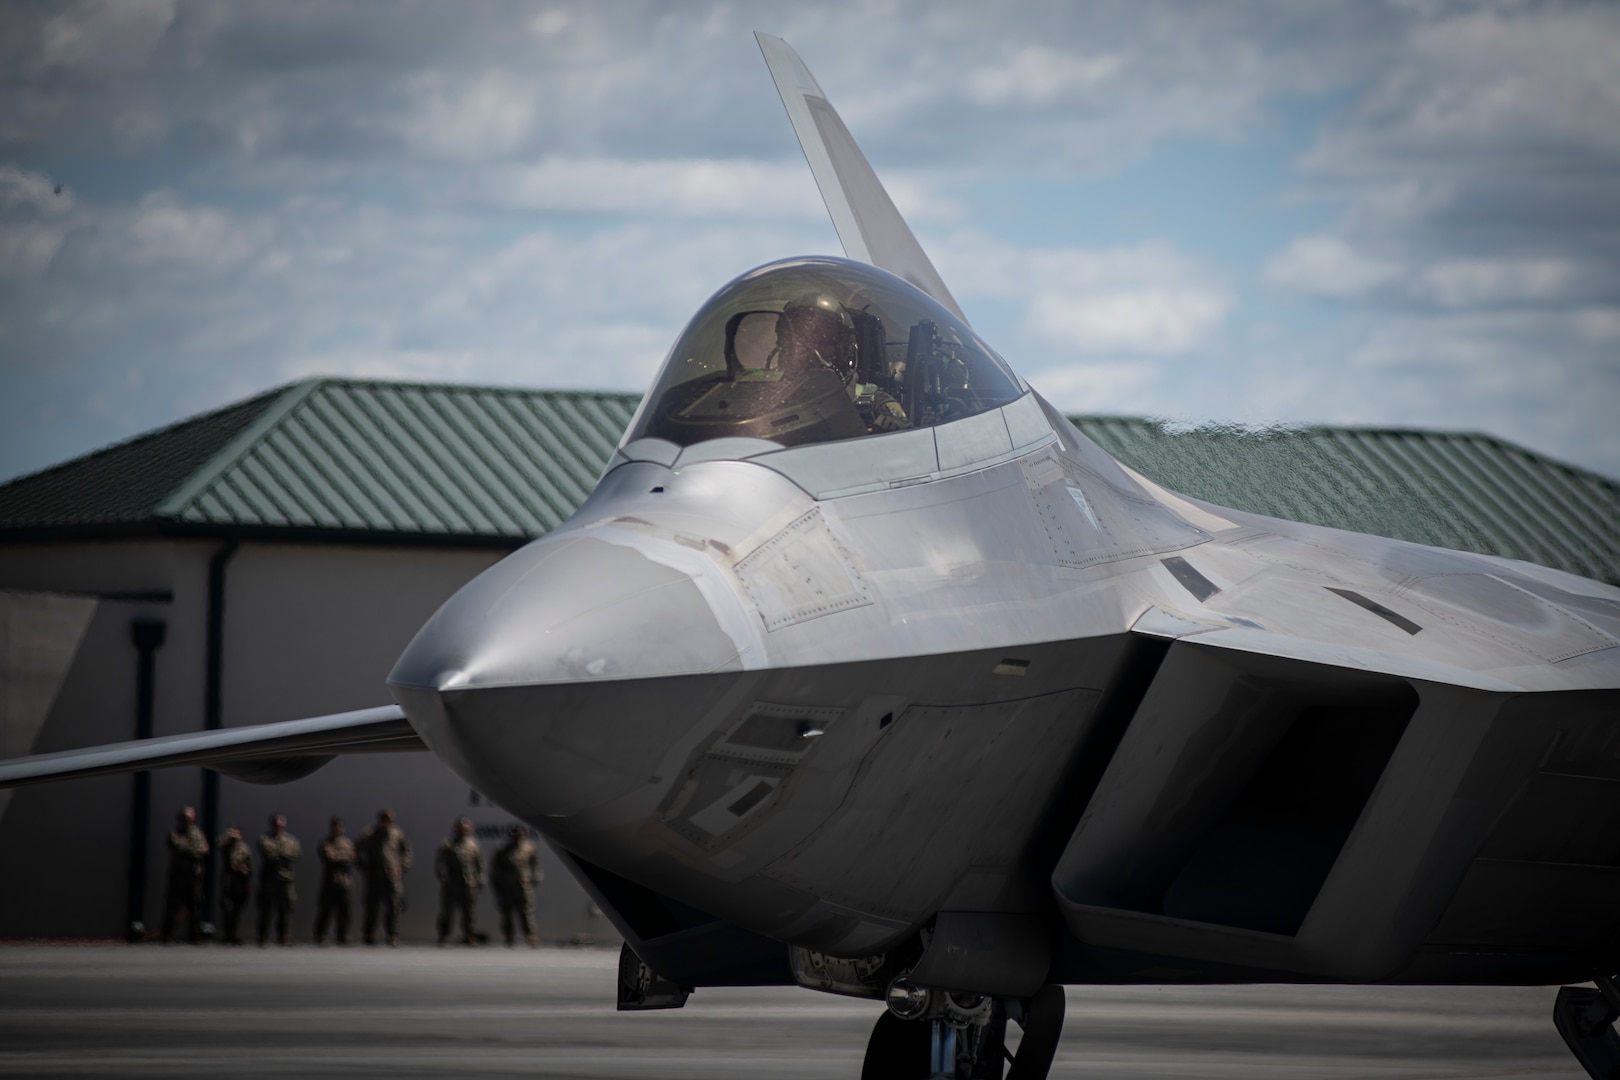 A U.S. Air Force pilot assigned to the 149th Fighter Squadron, Virginia Air National Guard, prepares for take off in an F-22 Raptor